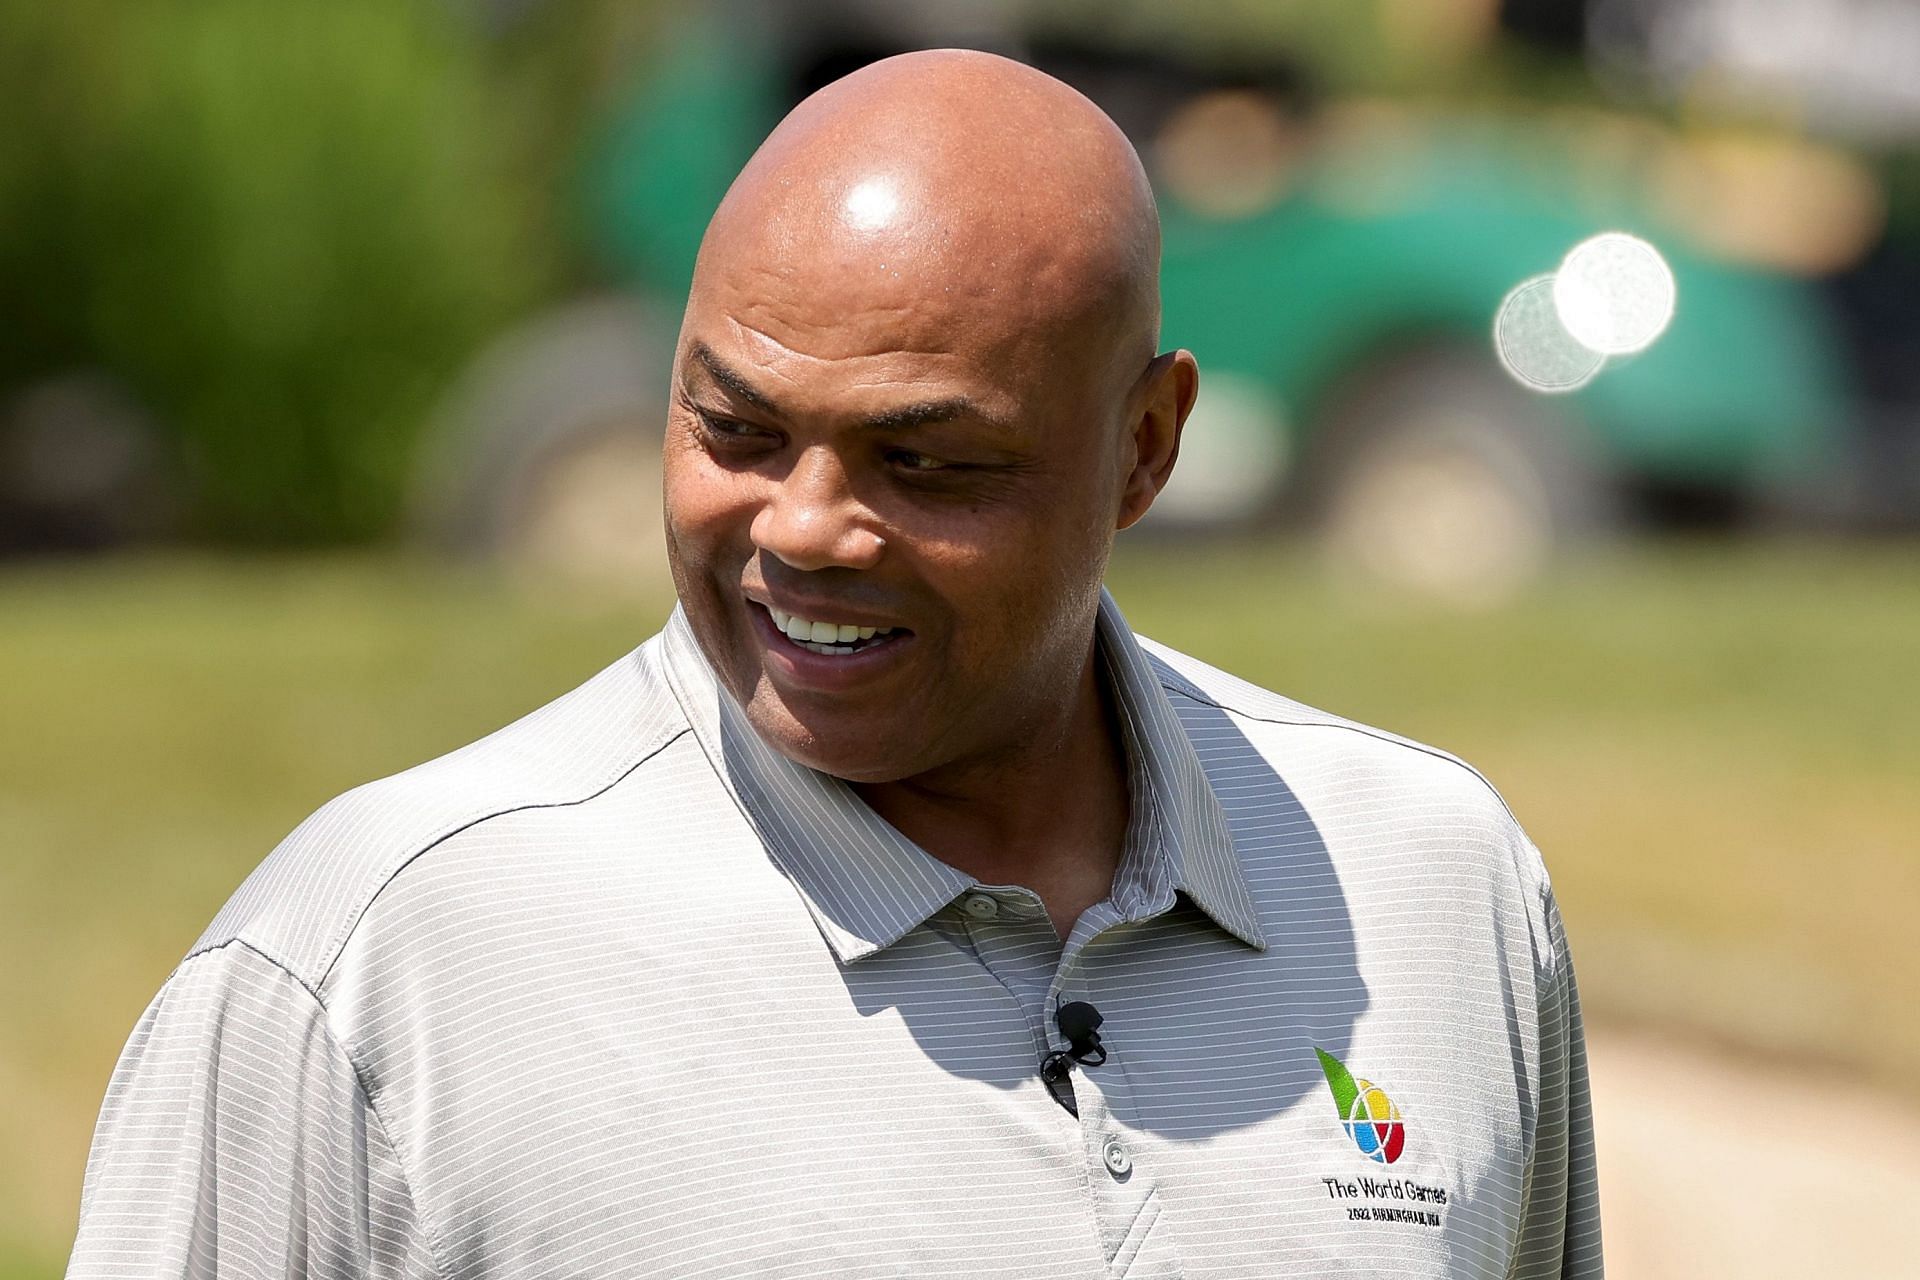 Charles Barkley never fails to delight on Inside the NBA